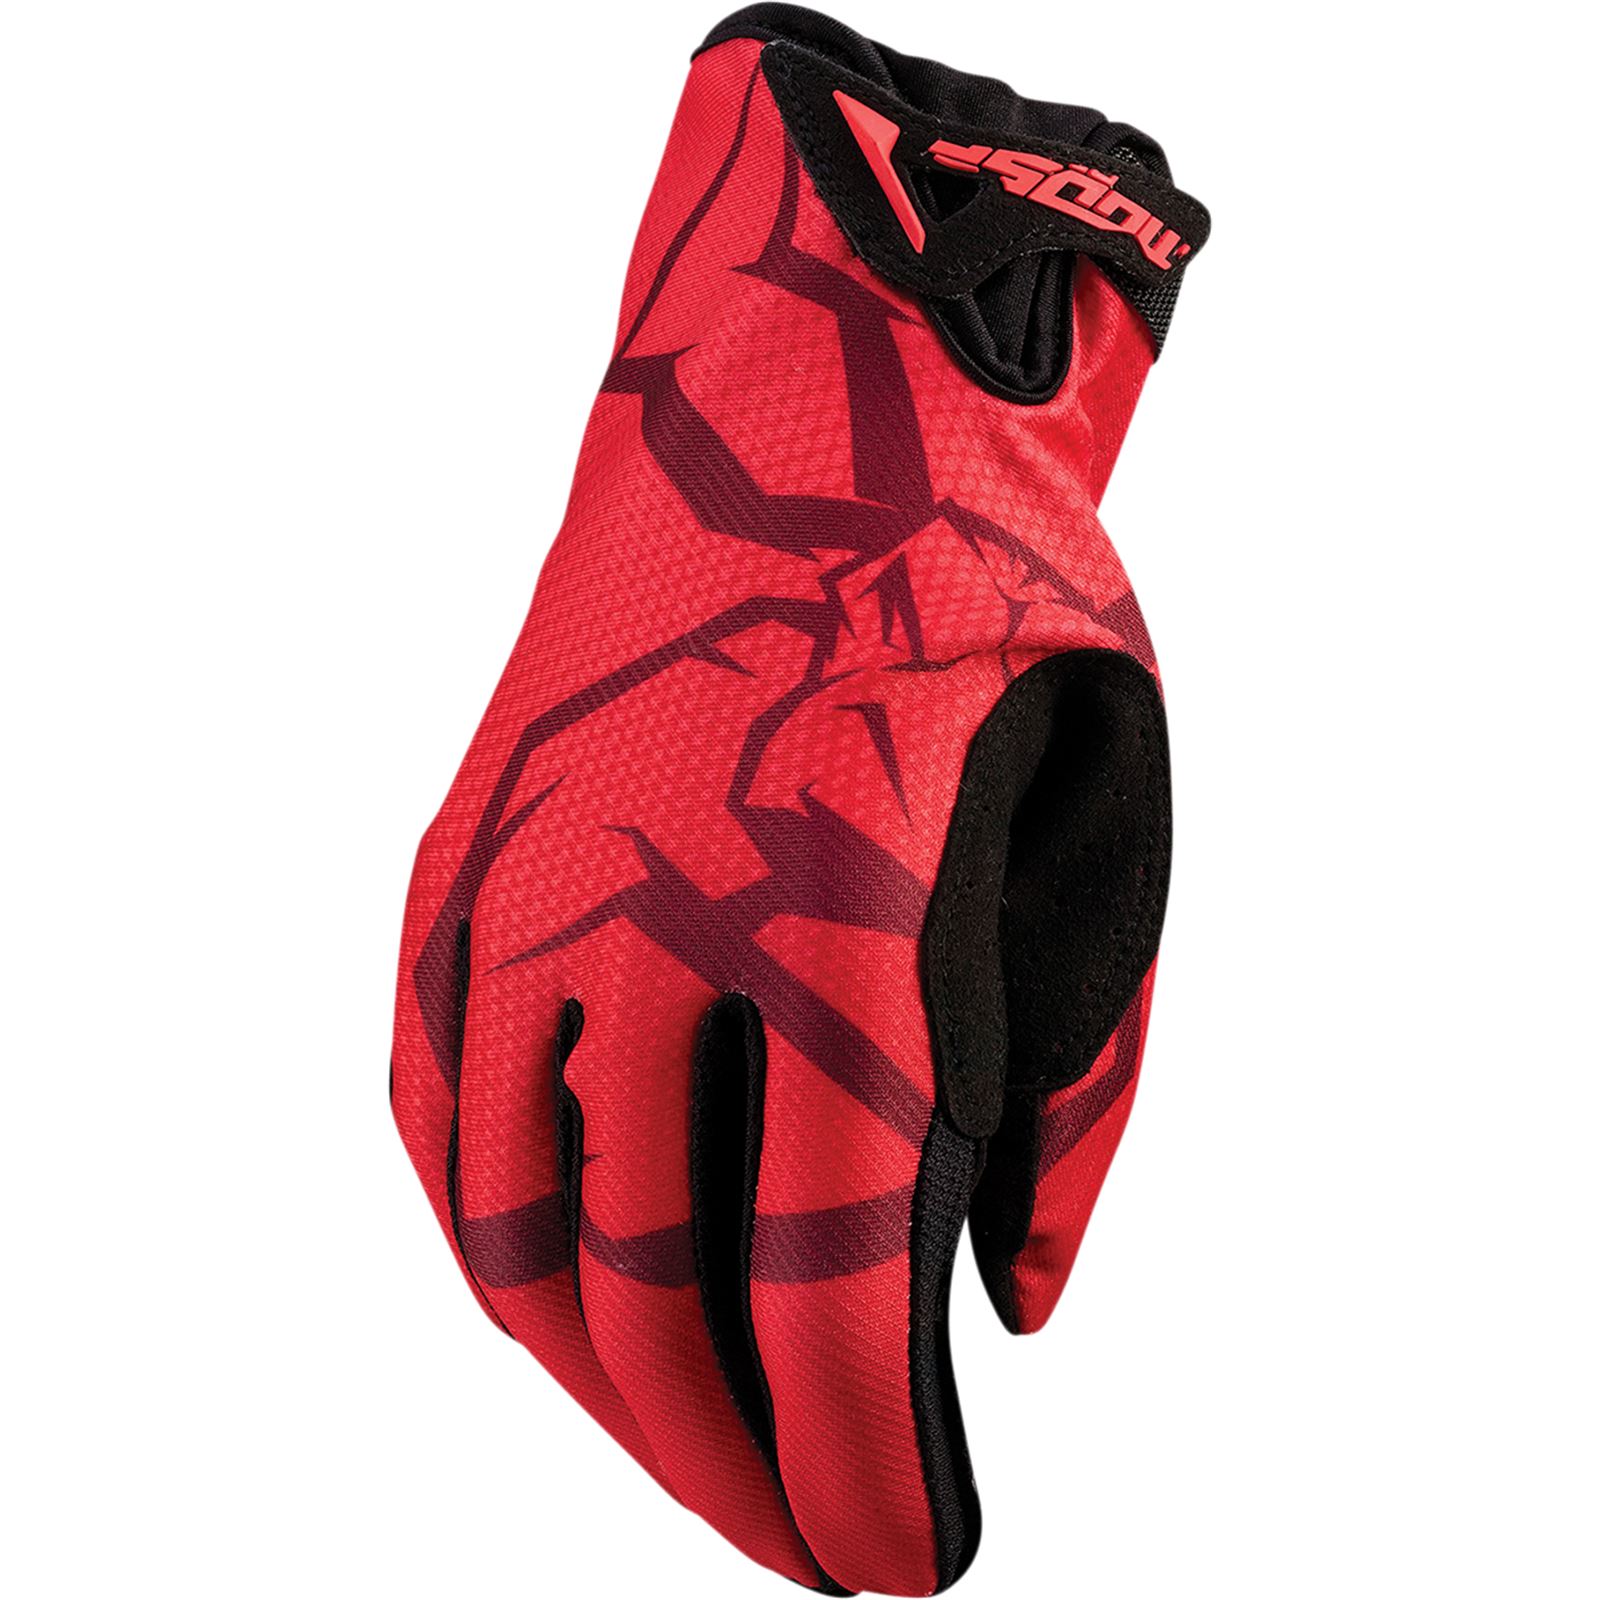 Moose Racing Agroid Pro Gloves - Red 